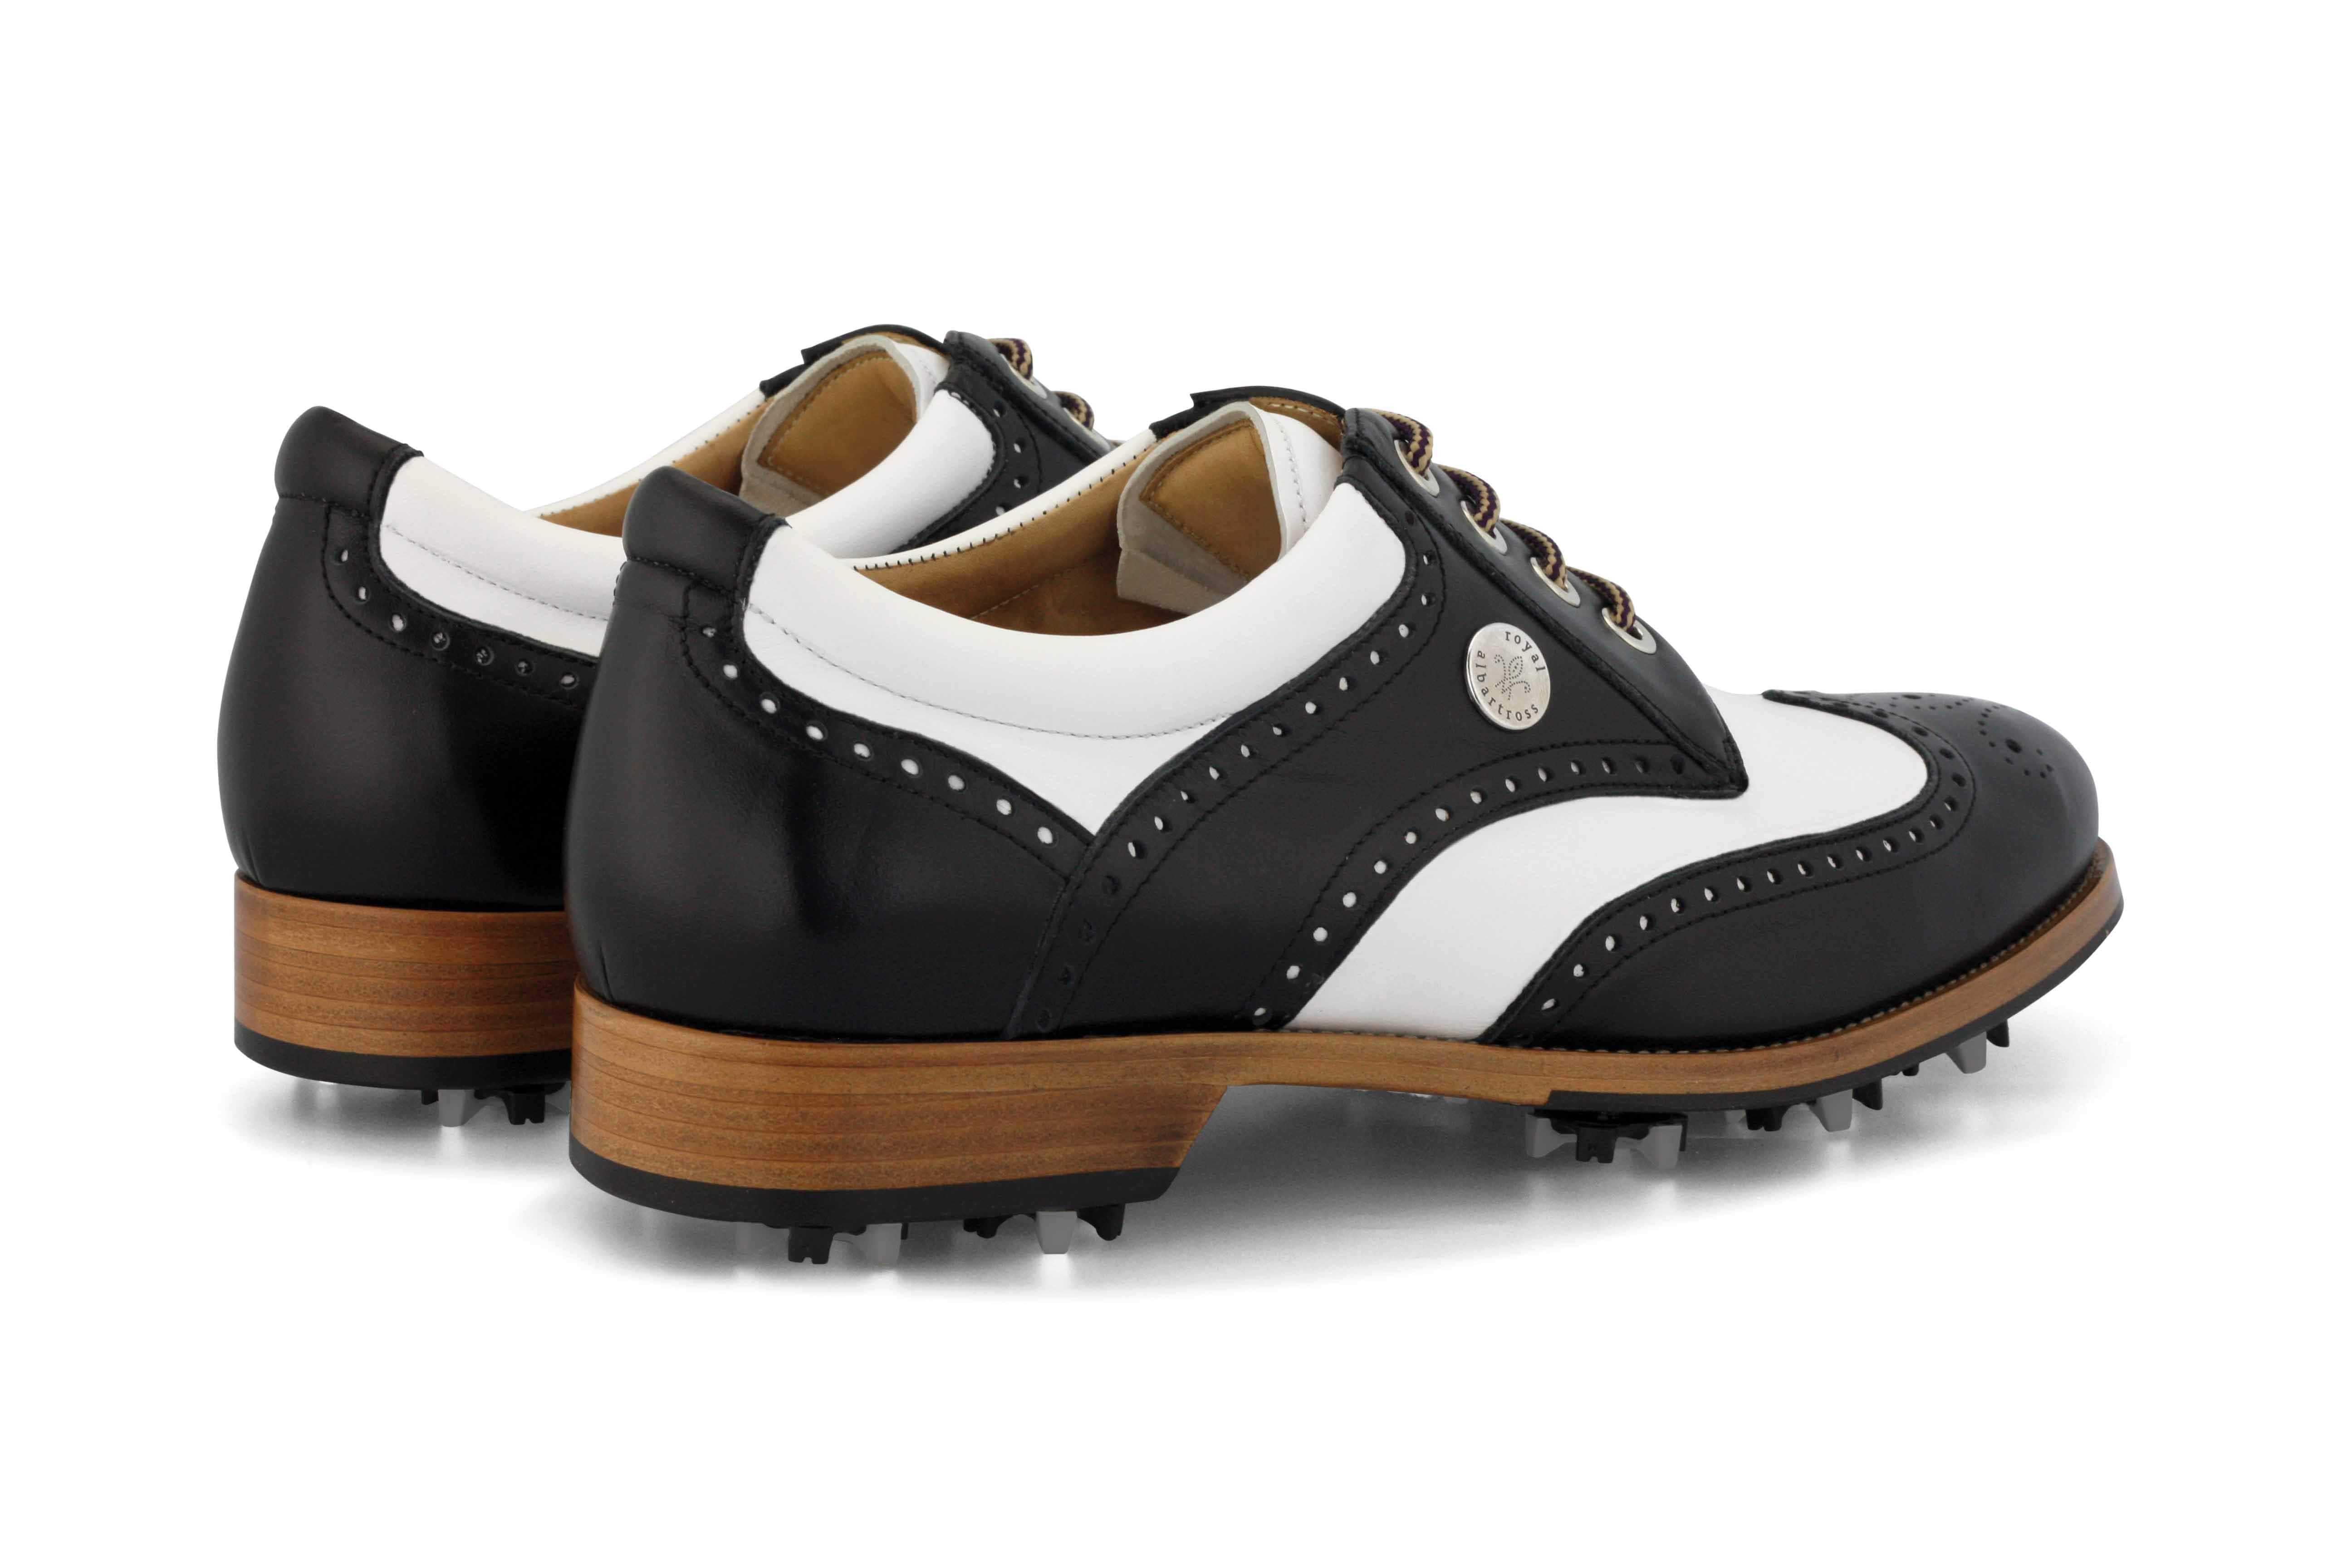 Men's Spiked Golf Shoe | Cleated White & Black | Royal Albartross Squire